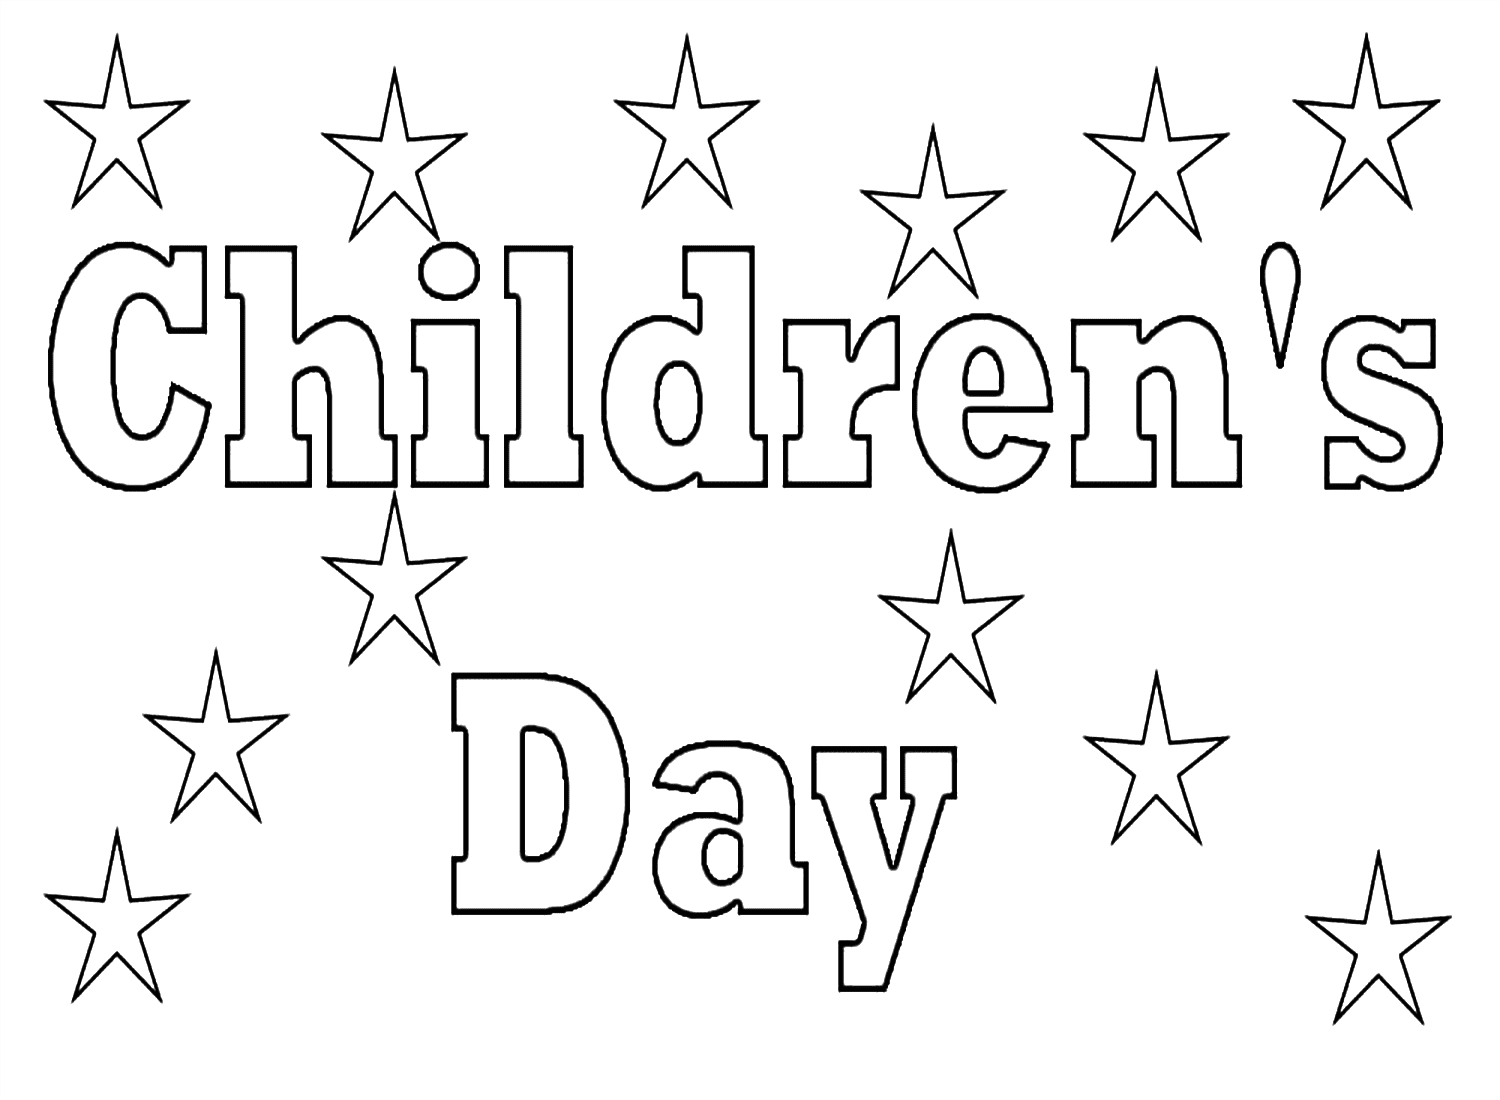 Childrens Day Free Printable from Children's Day